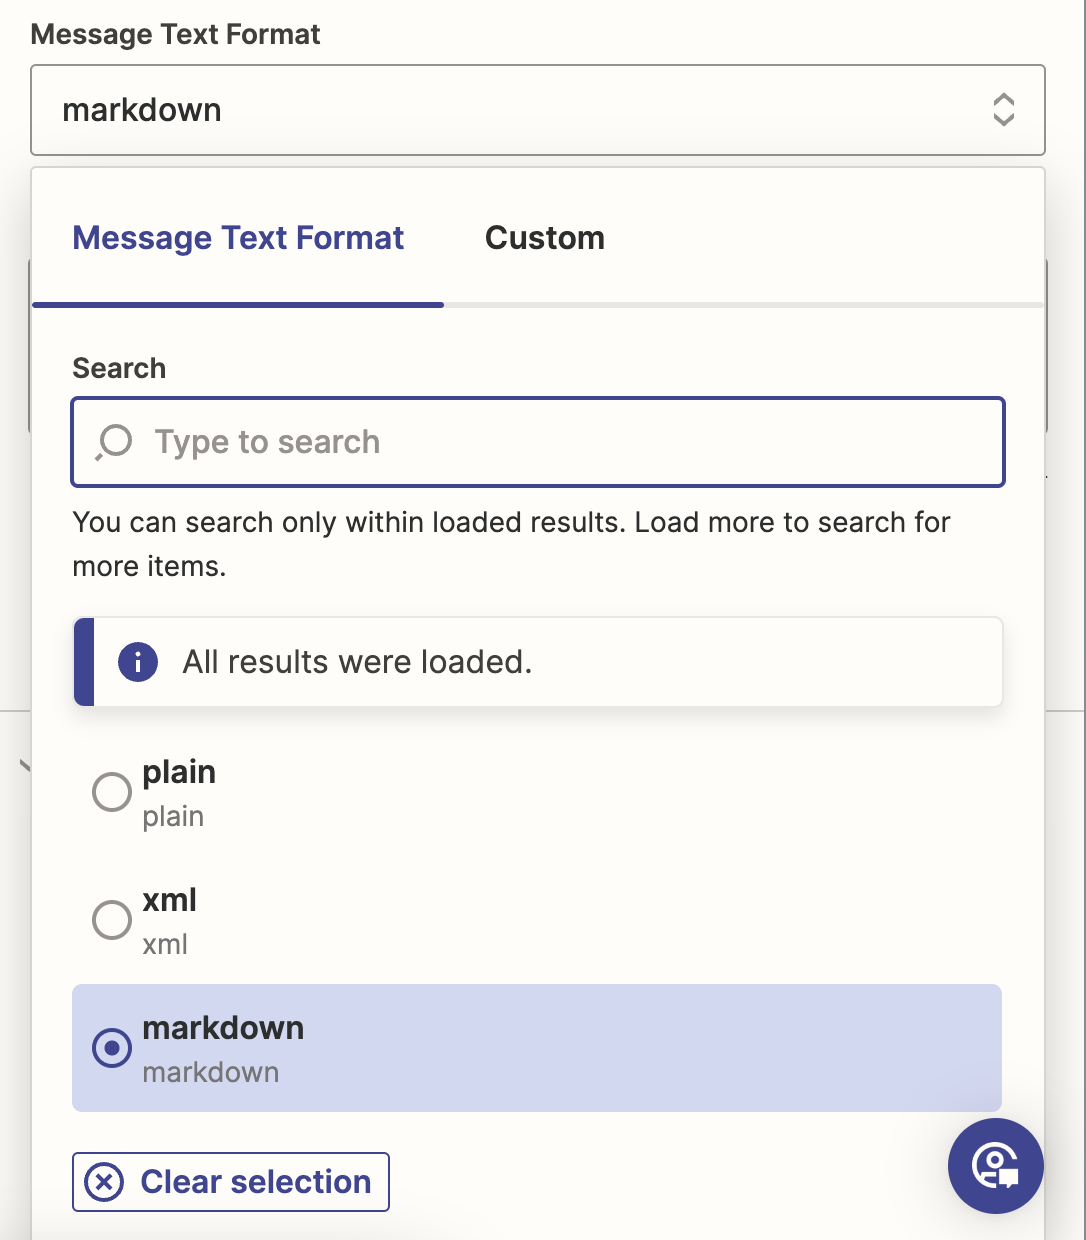 A screenshot of the "text format" options for a Microsoft Teams action step, with "markdown" selected.